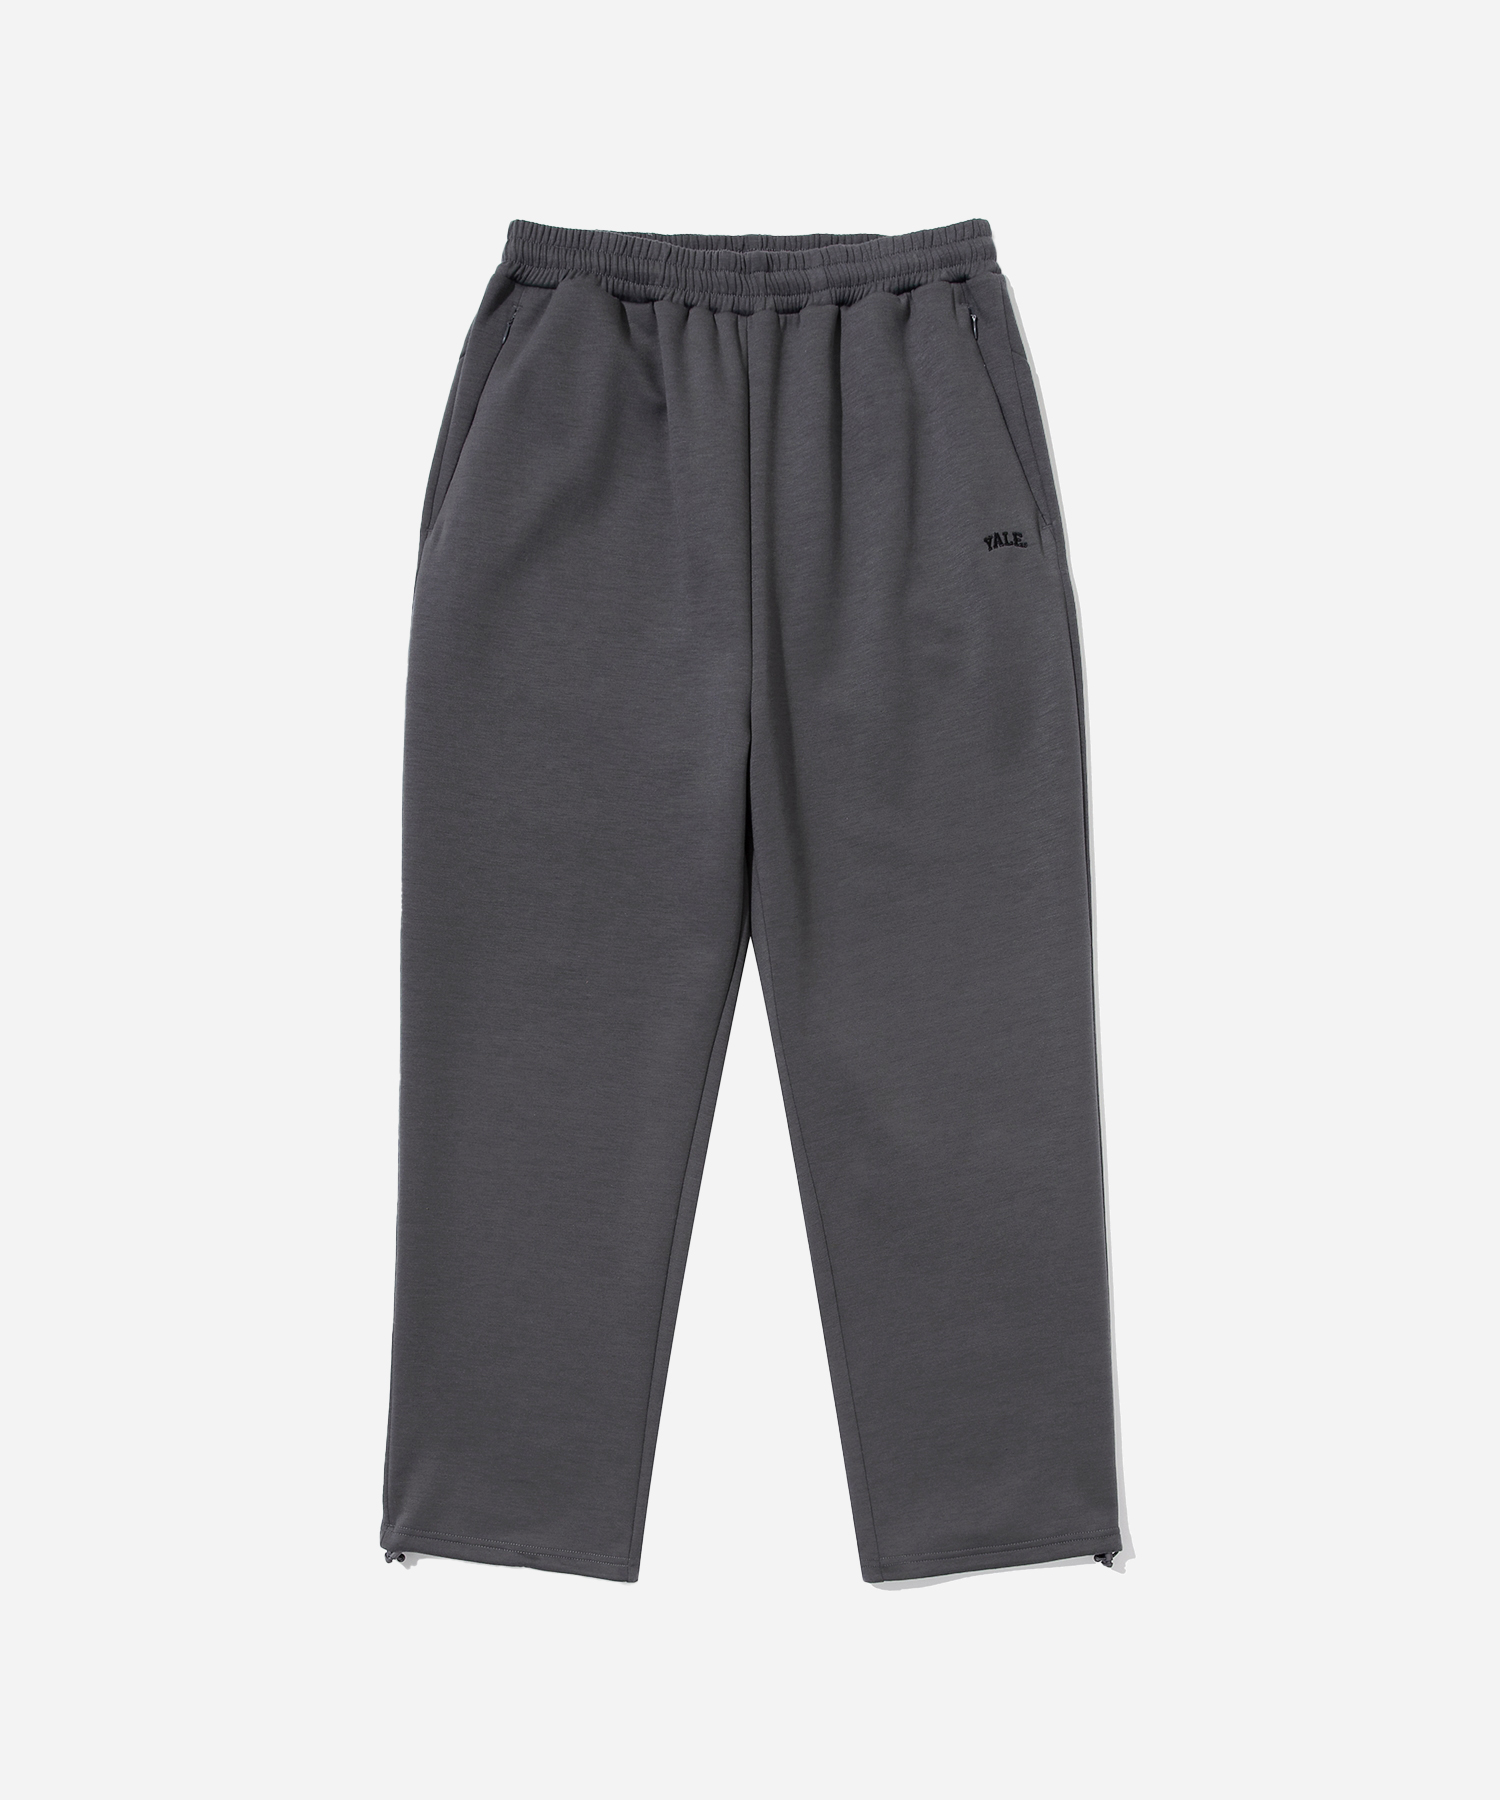 [ONEMILE WEAR] (+ UV CUT) UTILITY WIDE TRACK PANTS CHARCOAL